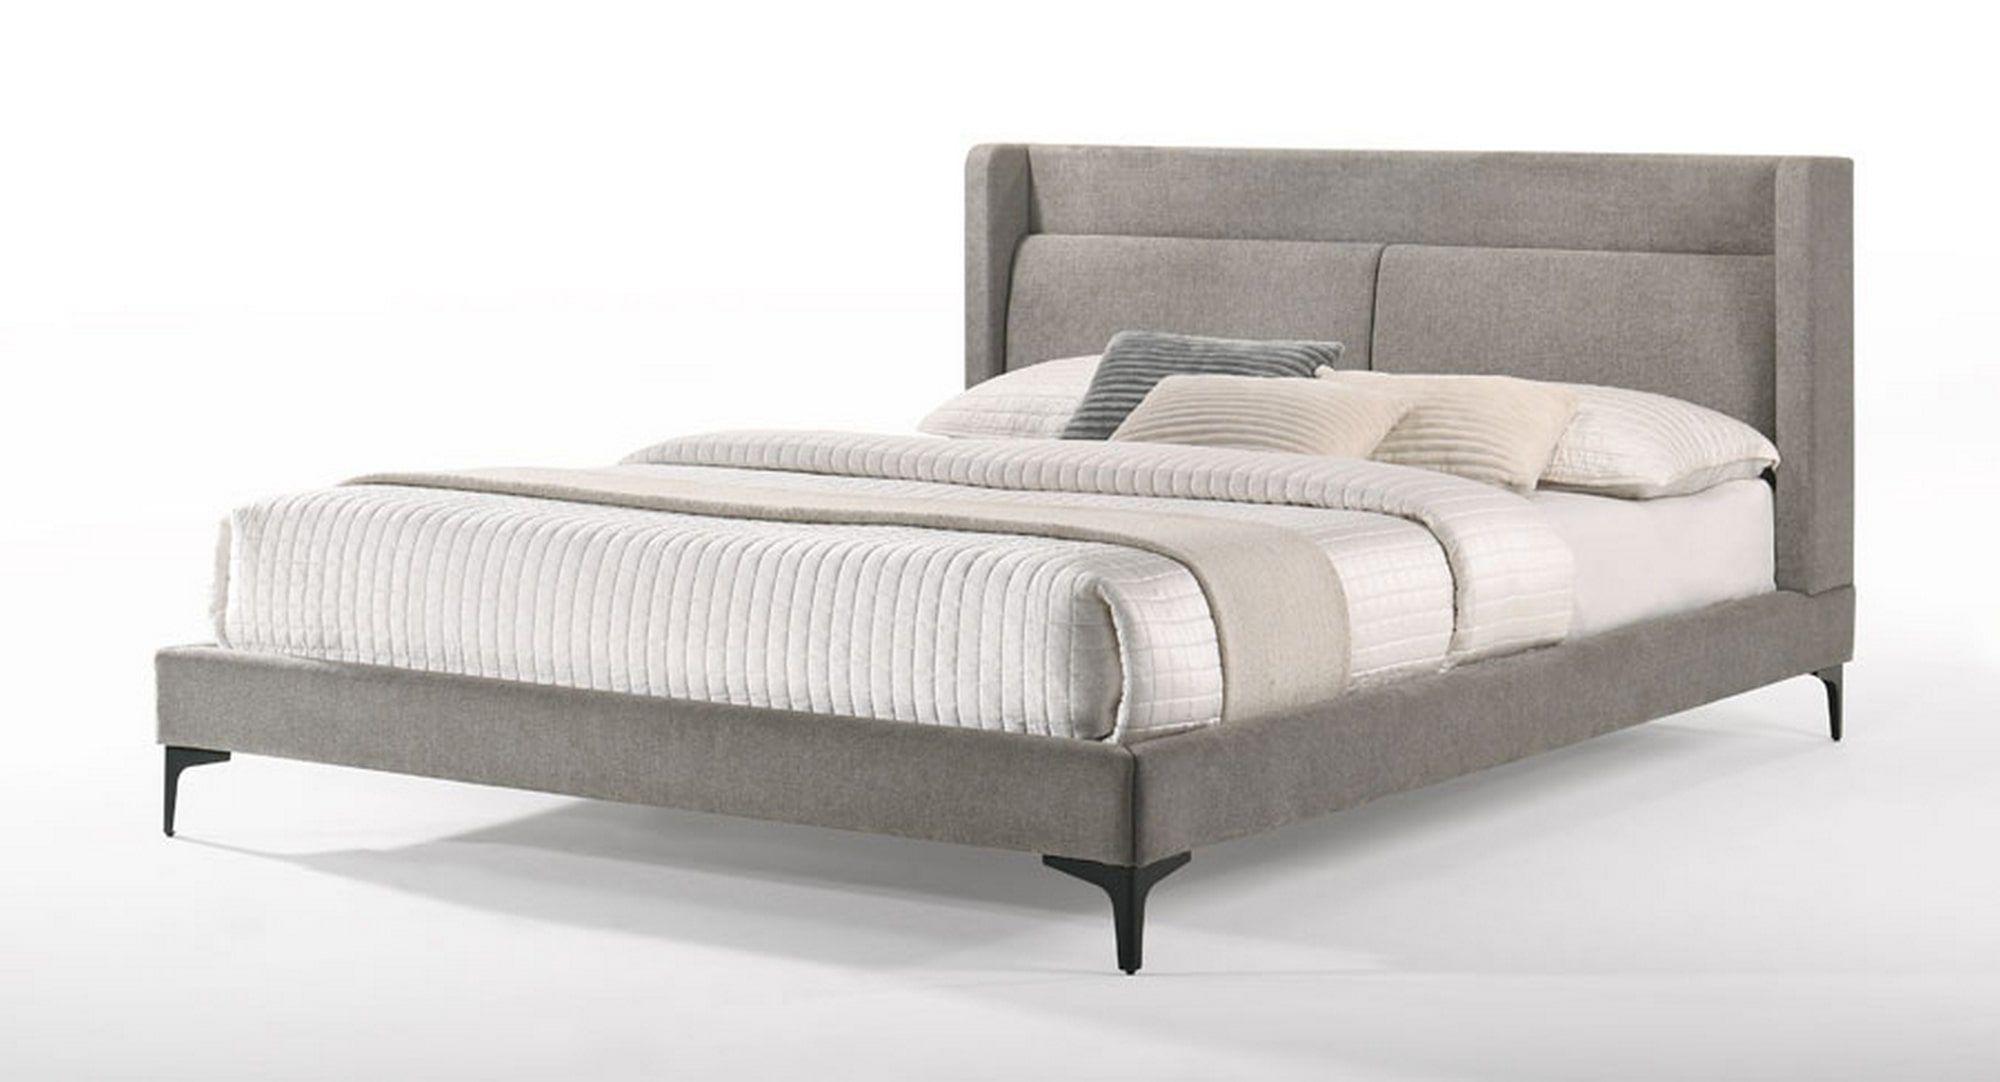 Contemporary, Modern Panel Bed VGMABR-103 VGMABR-103 77564A in Gray Fabric